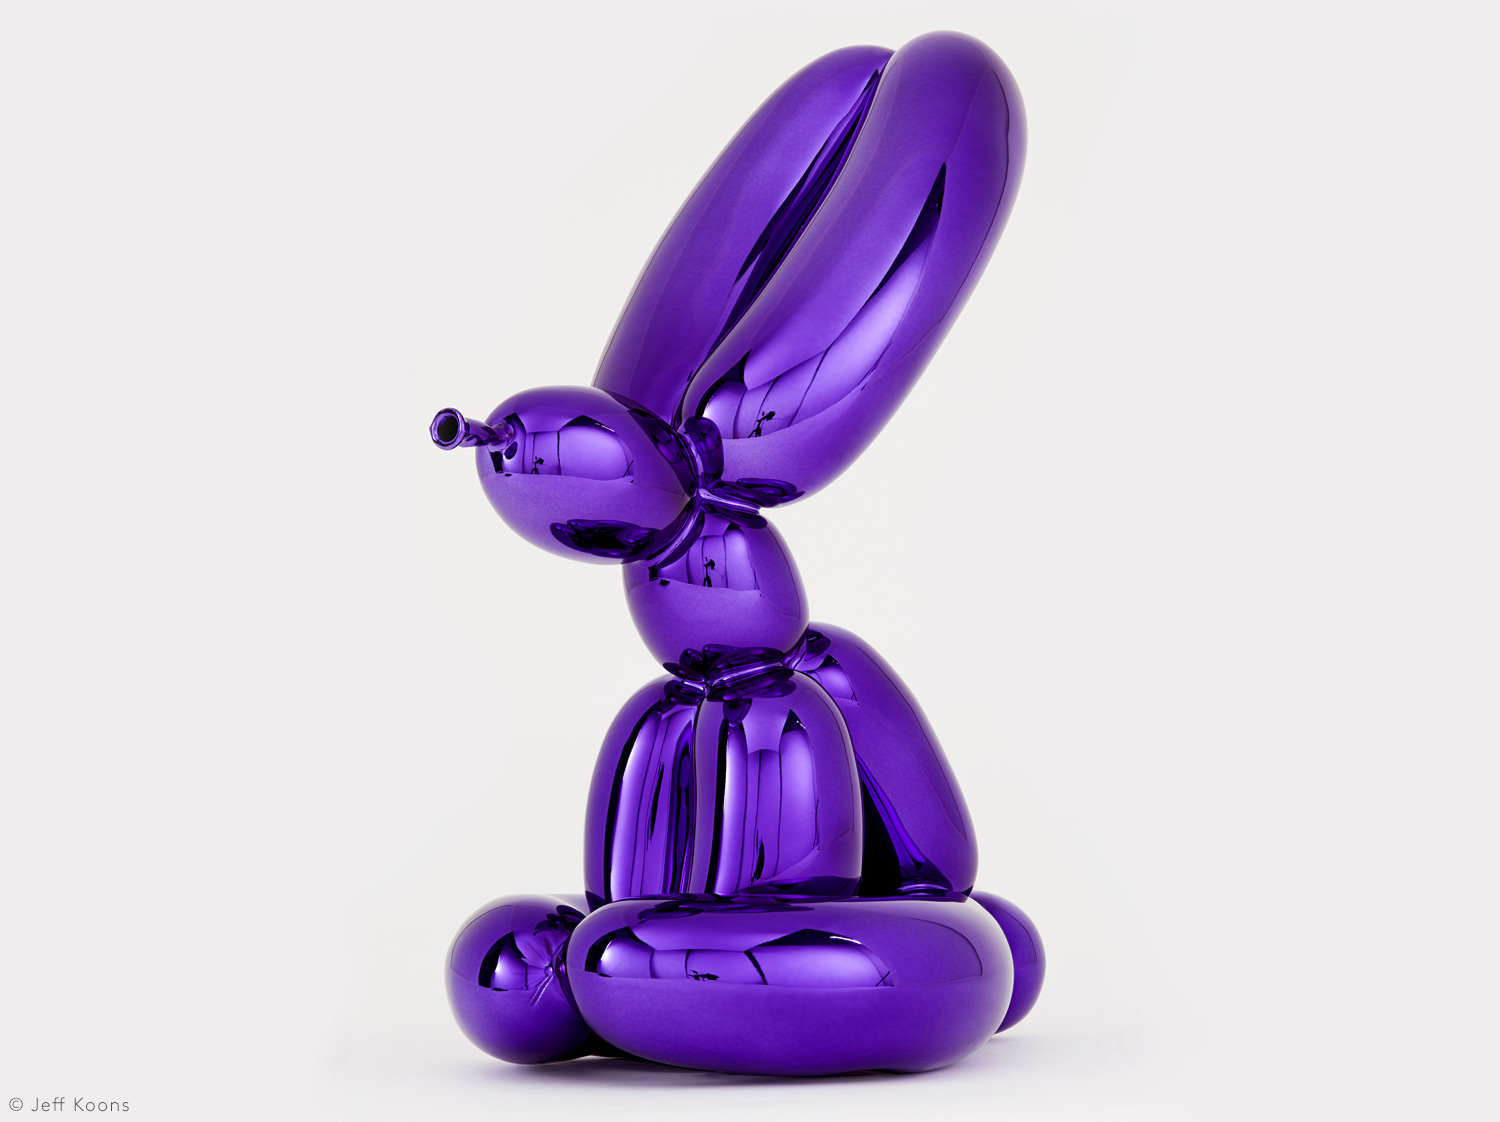 China Porcelain edition of the collection BALLOON RABBIT (VIOLET) by Jeff Koons | Bernardaud